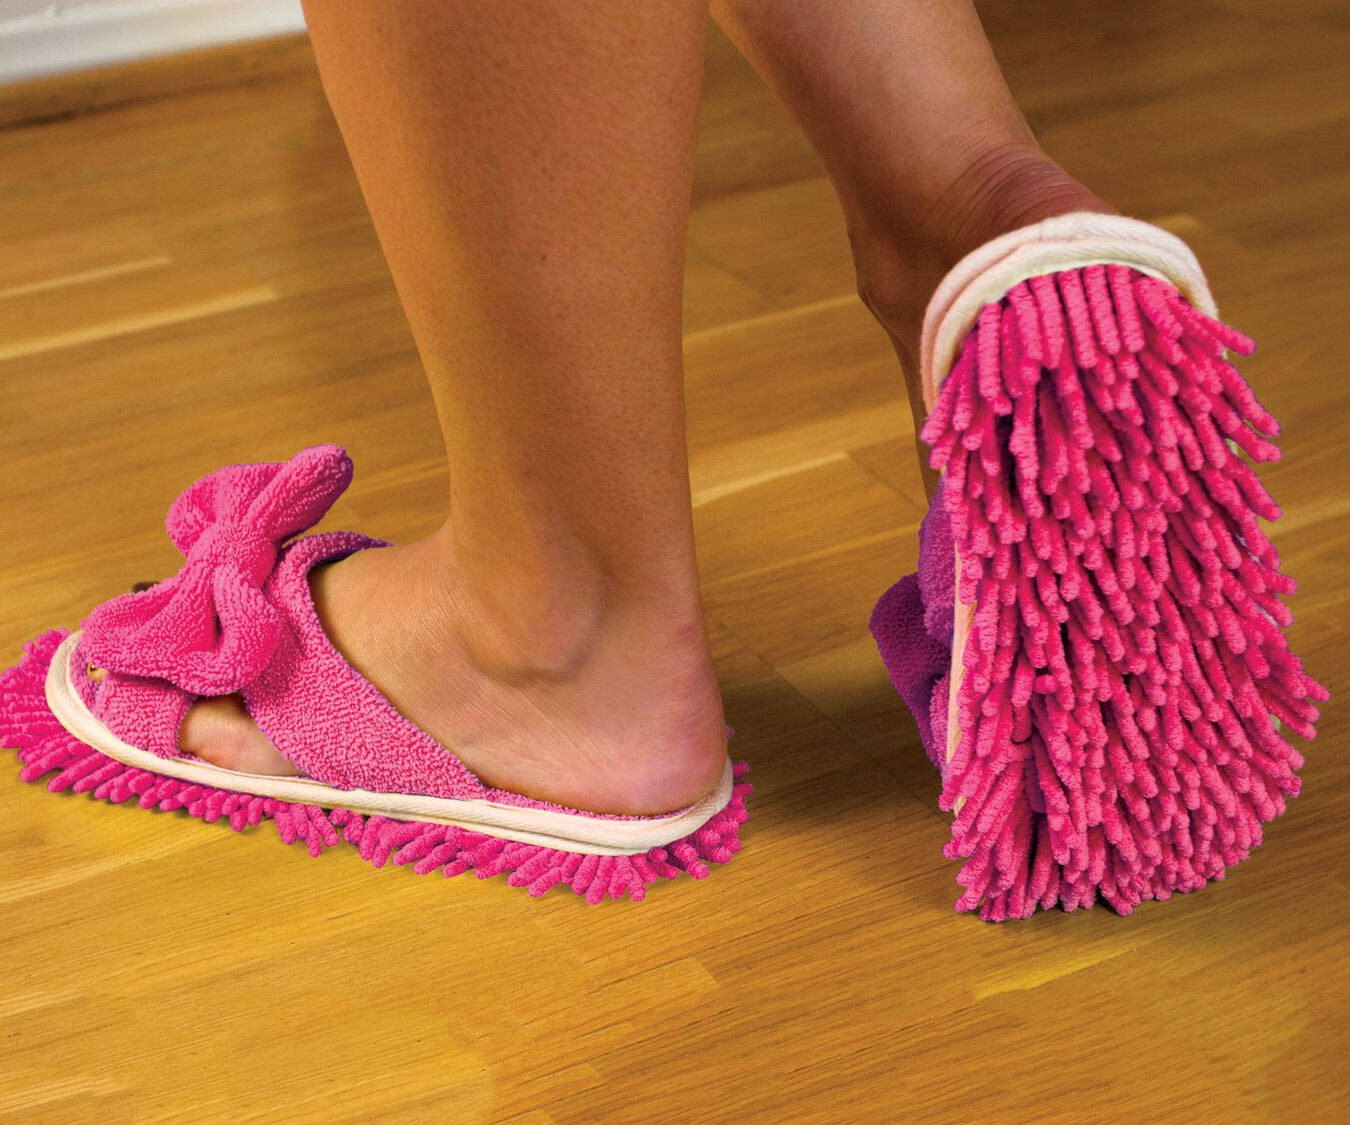 Floor Cleaning Slippers - coolthings.us